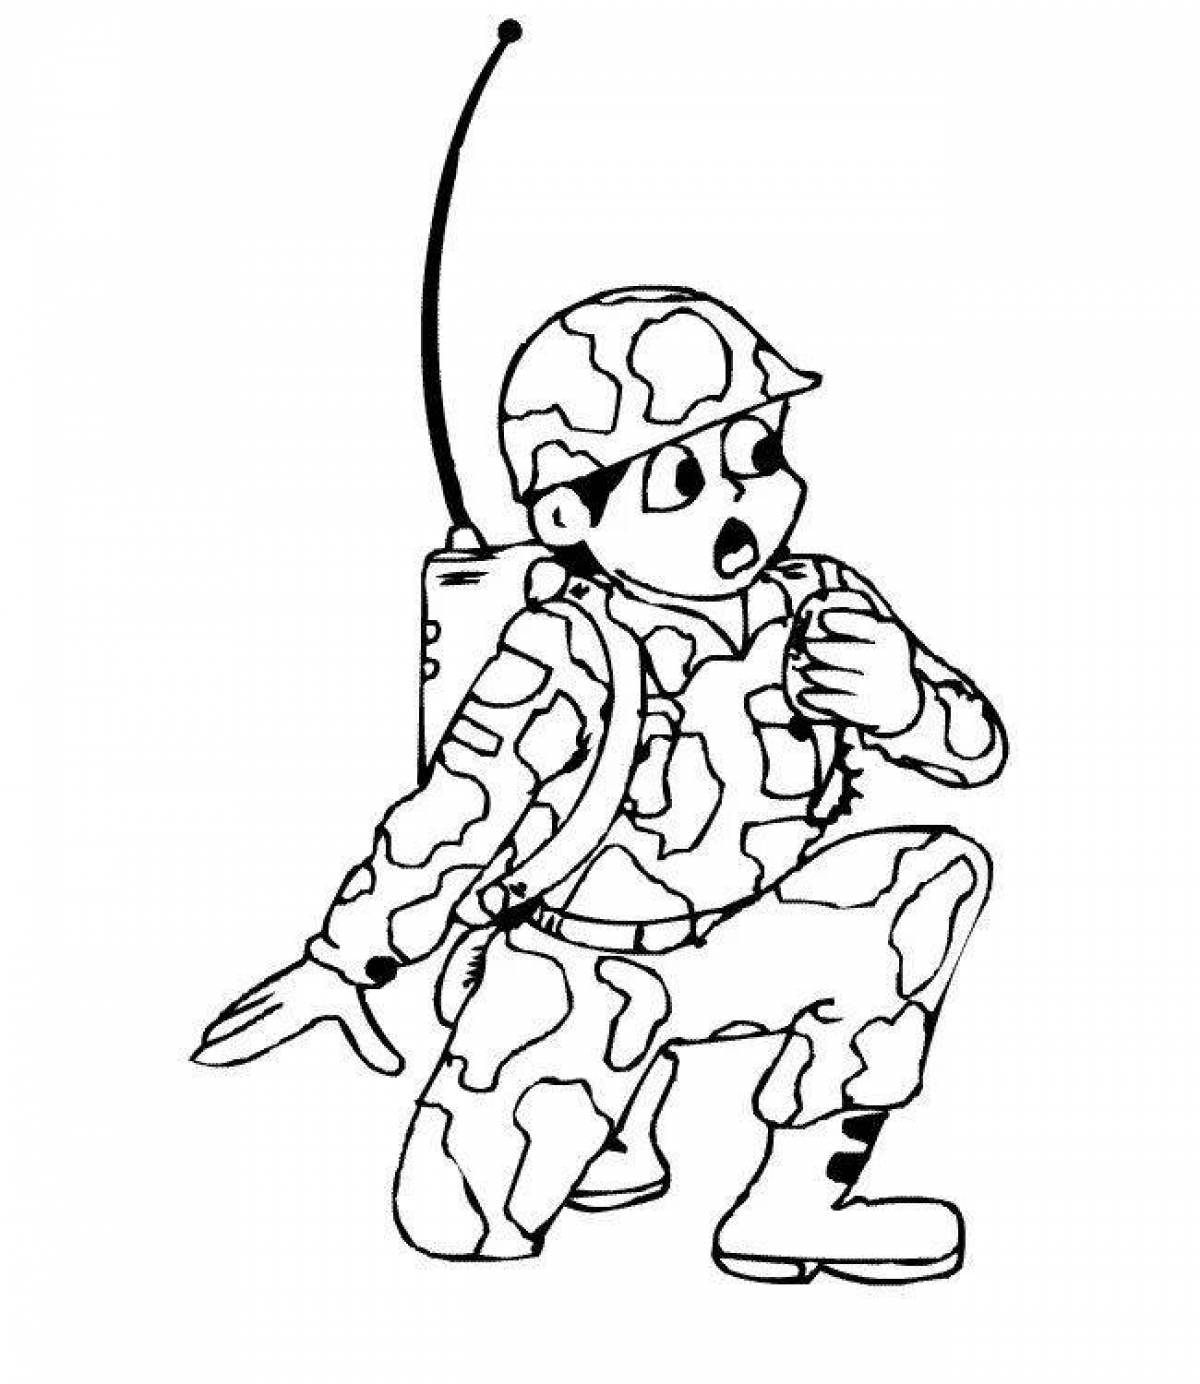 Heroic soldier coloring page